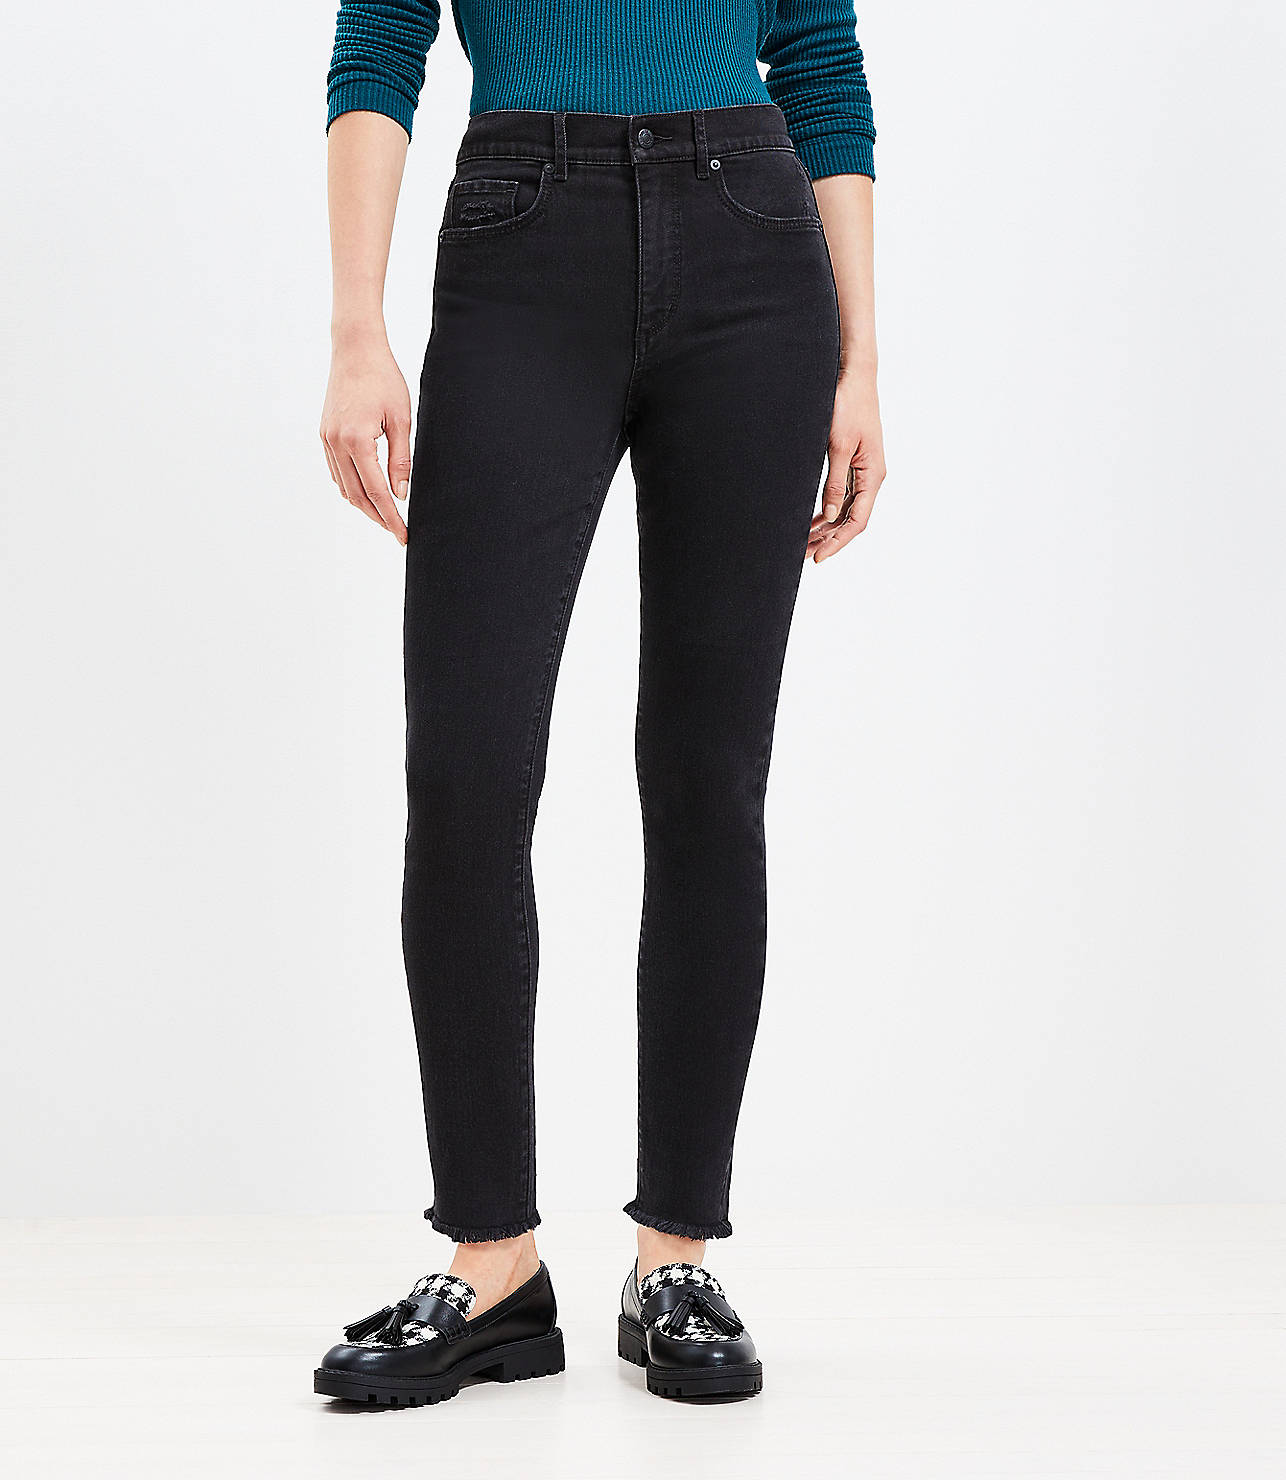 Petite Curvy Frayed High Rise Skinny Jeans in Washed Black Wash